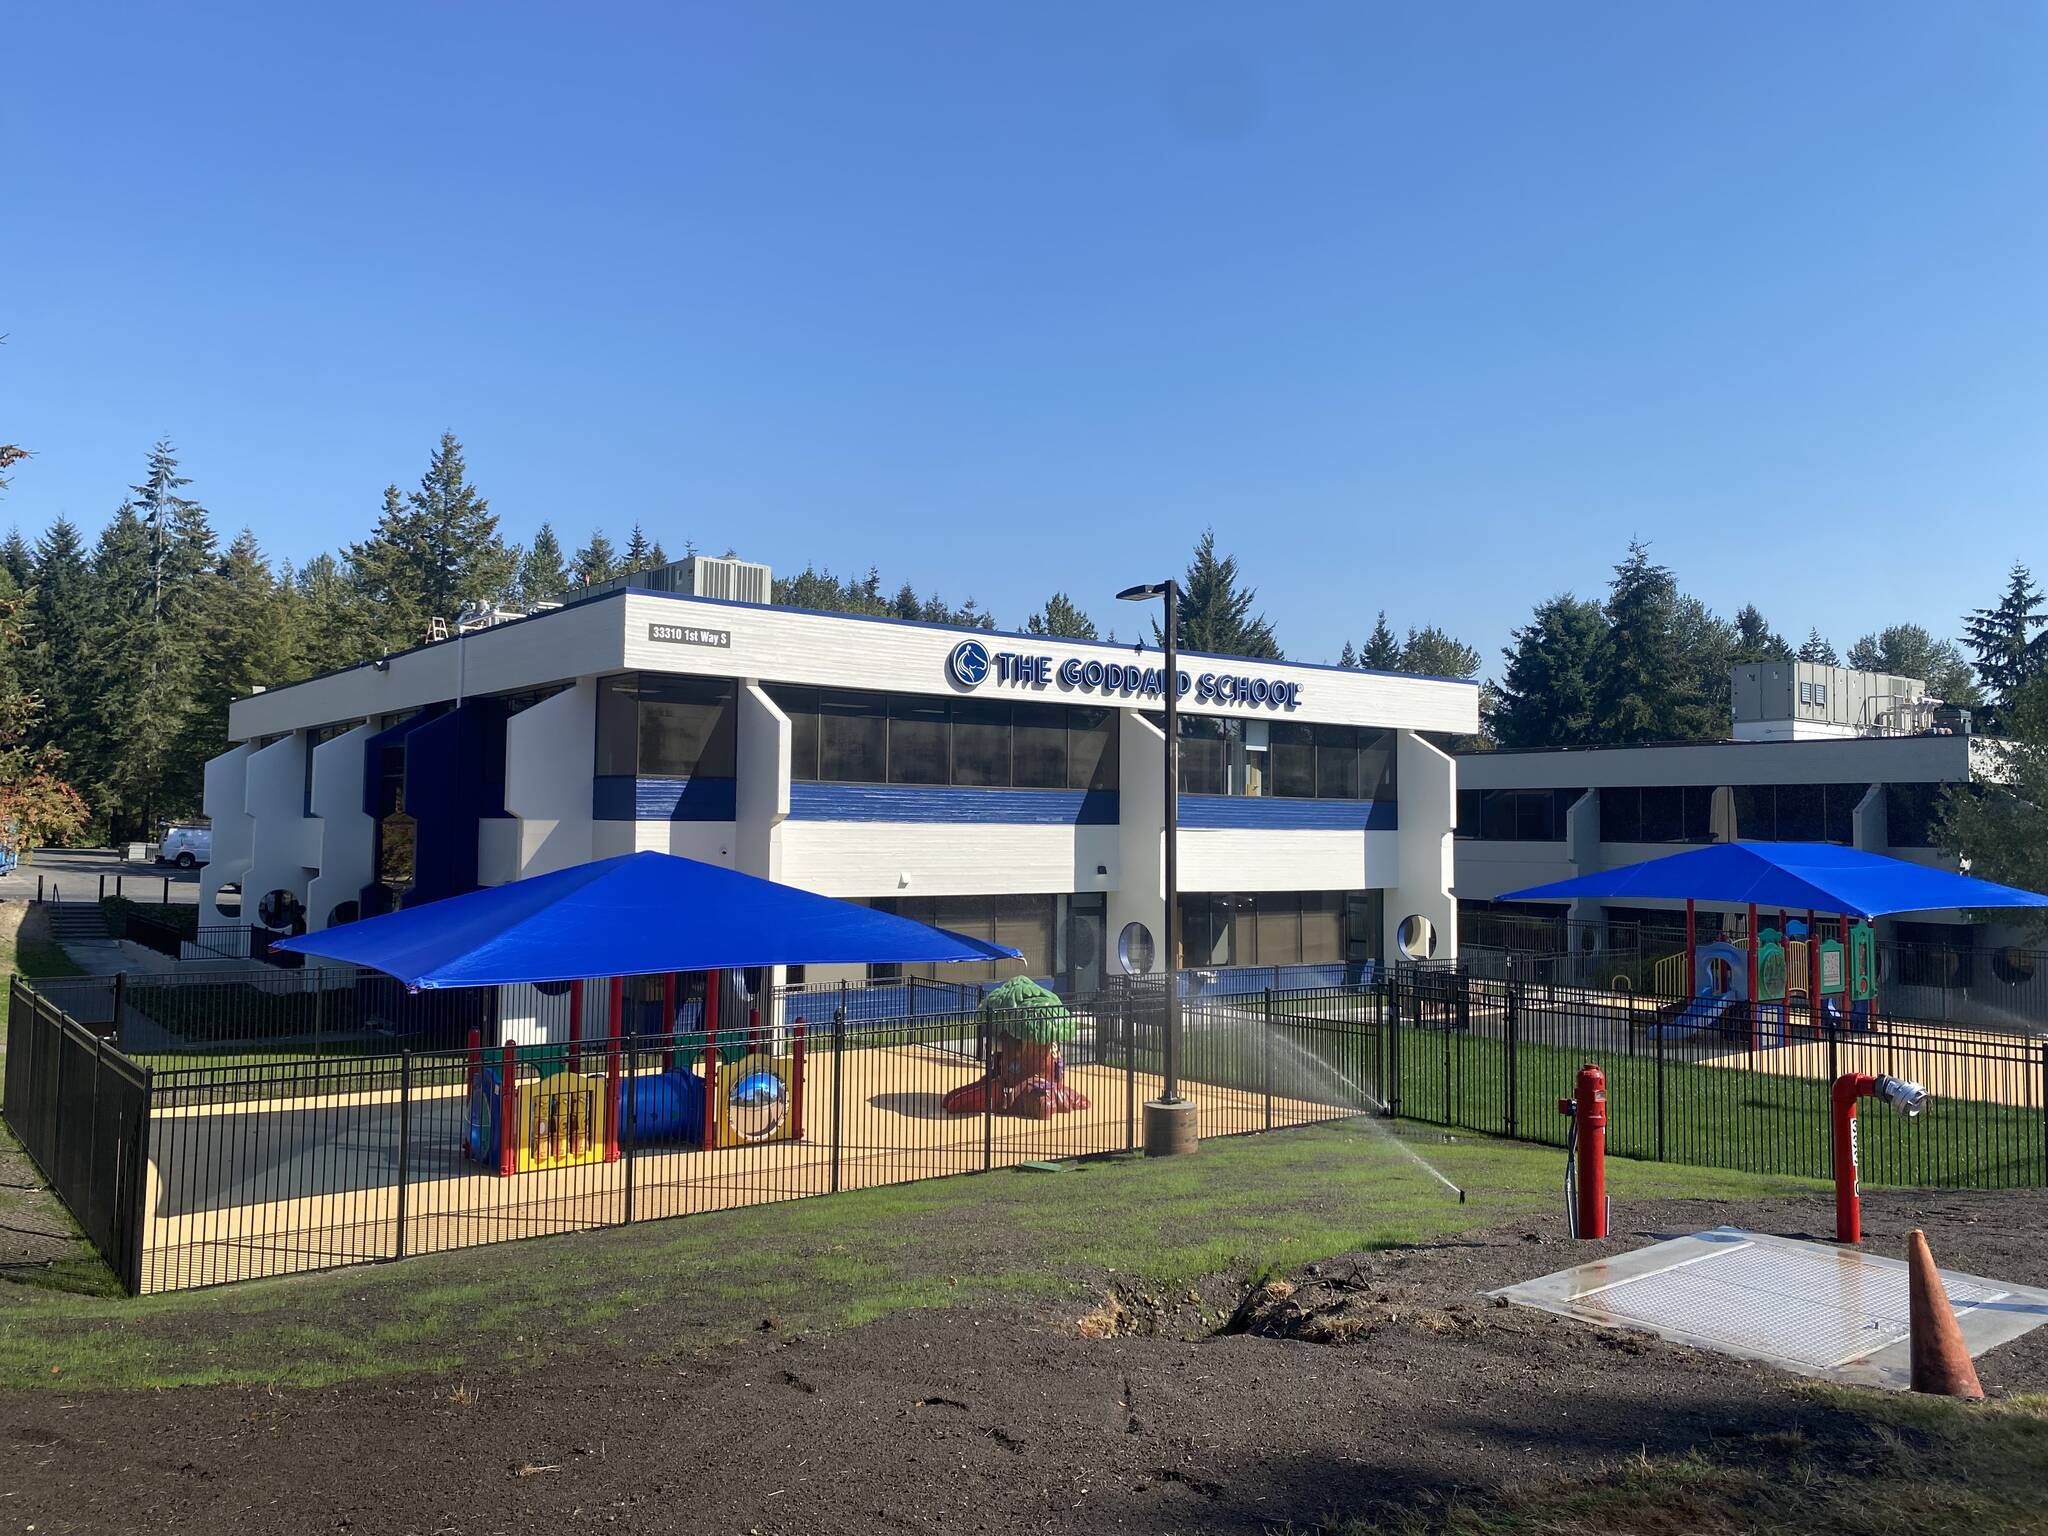 The Goddard School is located at 33310 1st Way South in Federal Way. Courtesy photo